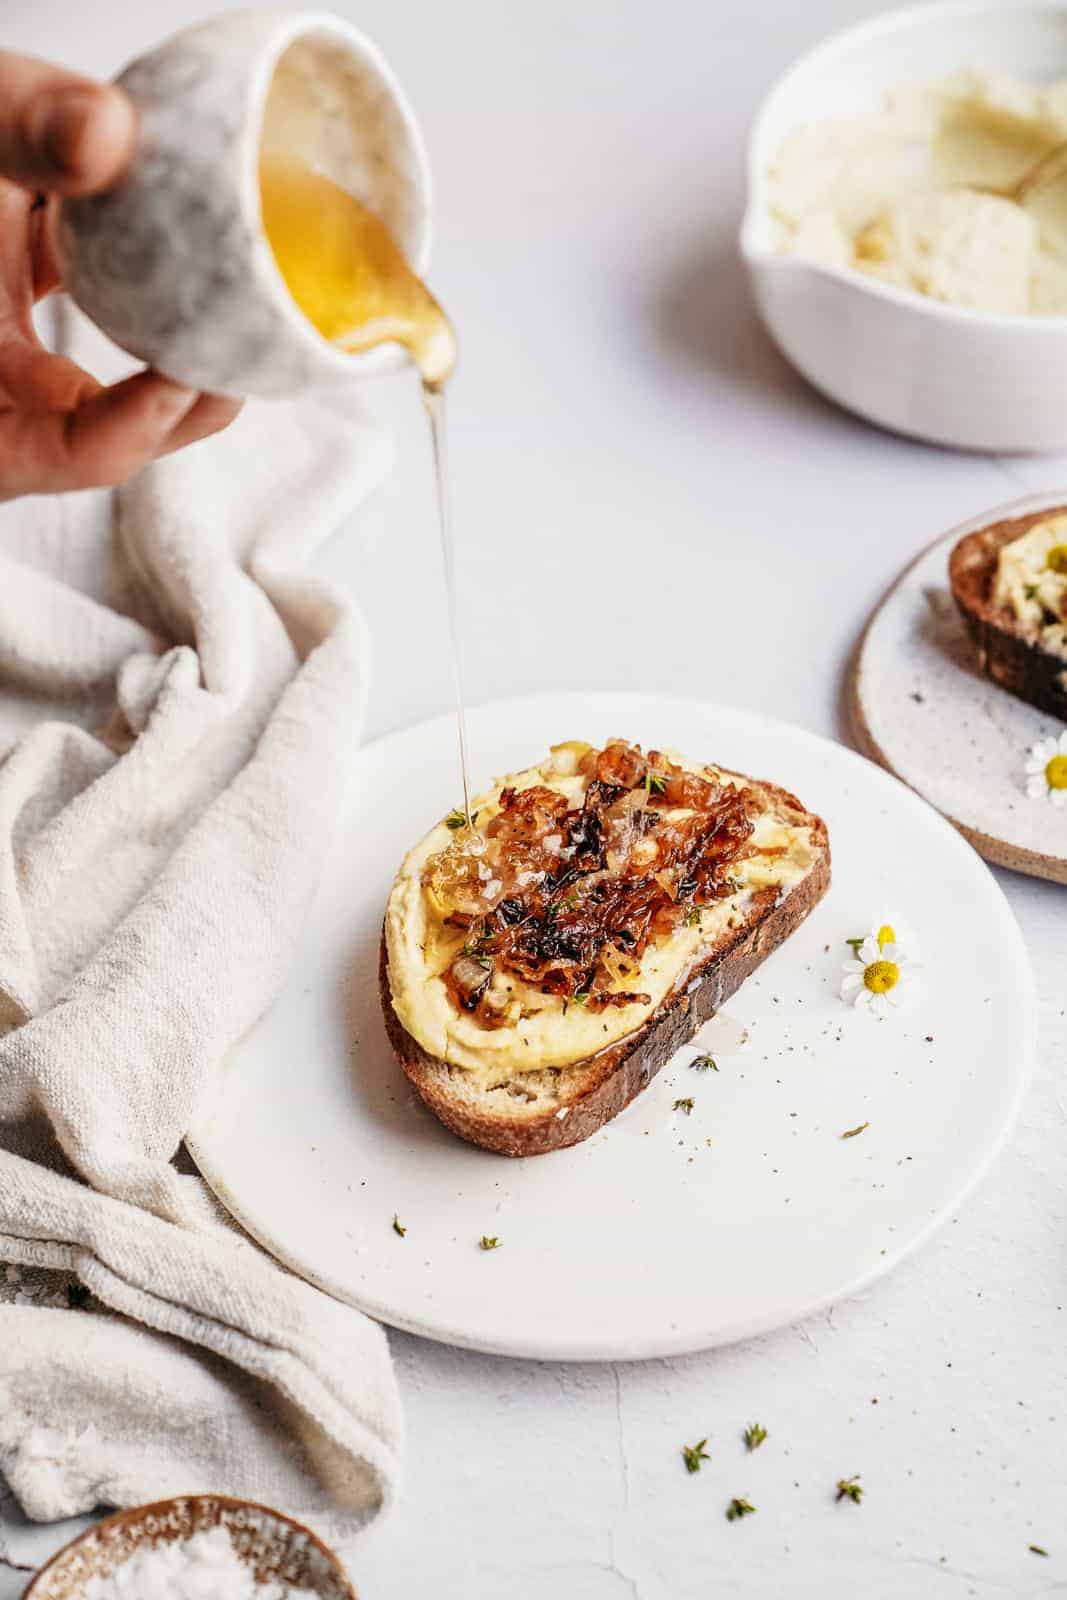 Honey pouring on ricotta toast to showcase the importance of movement in photography